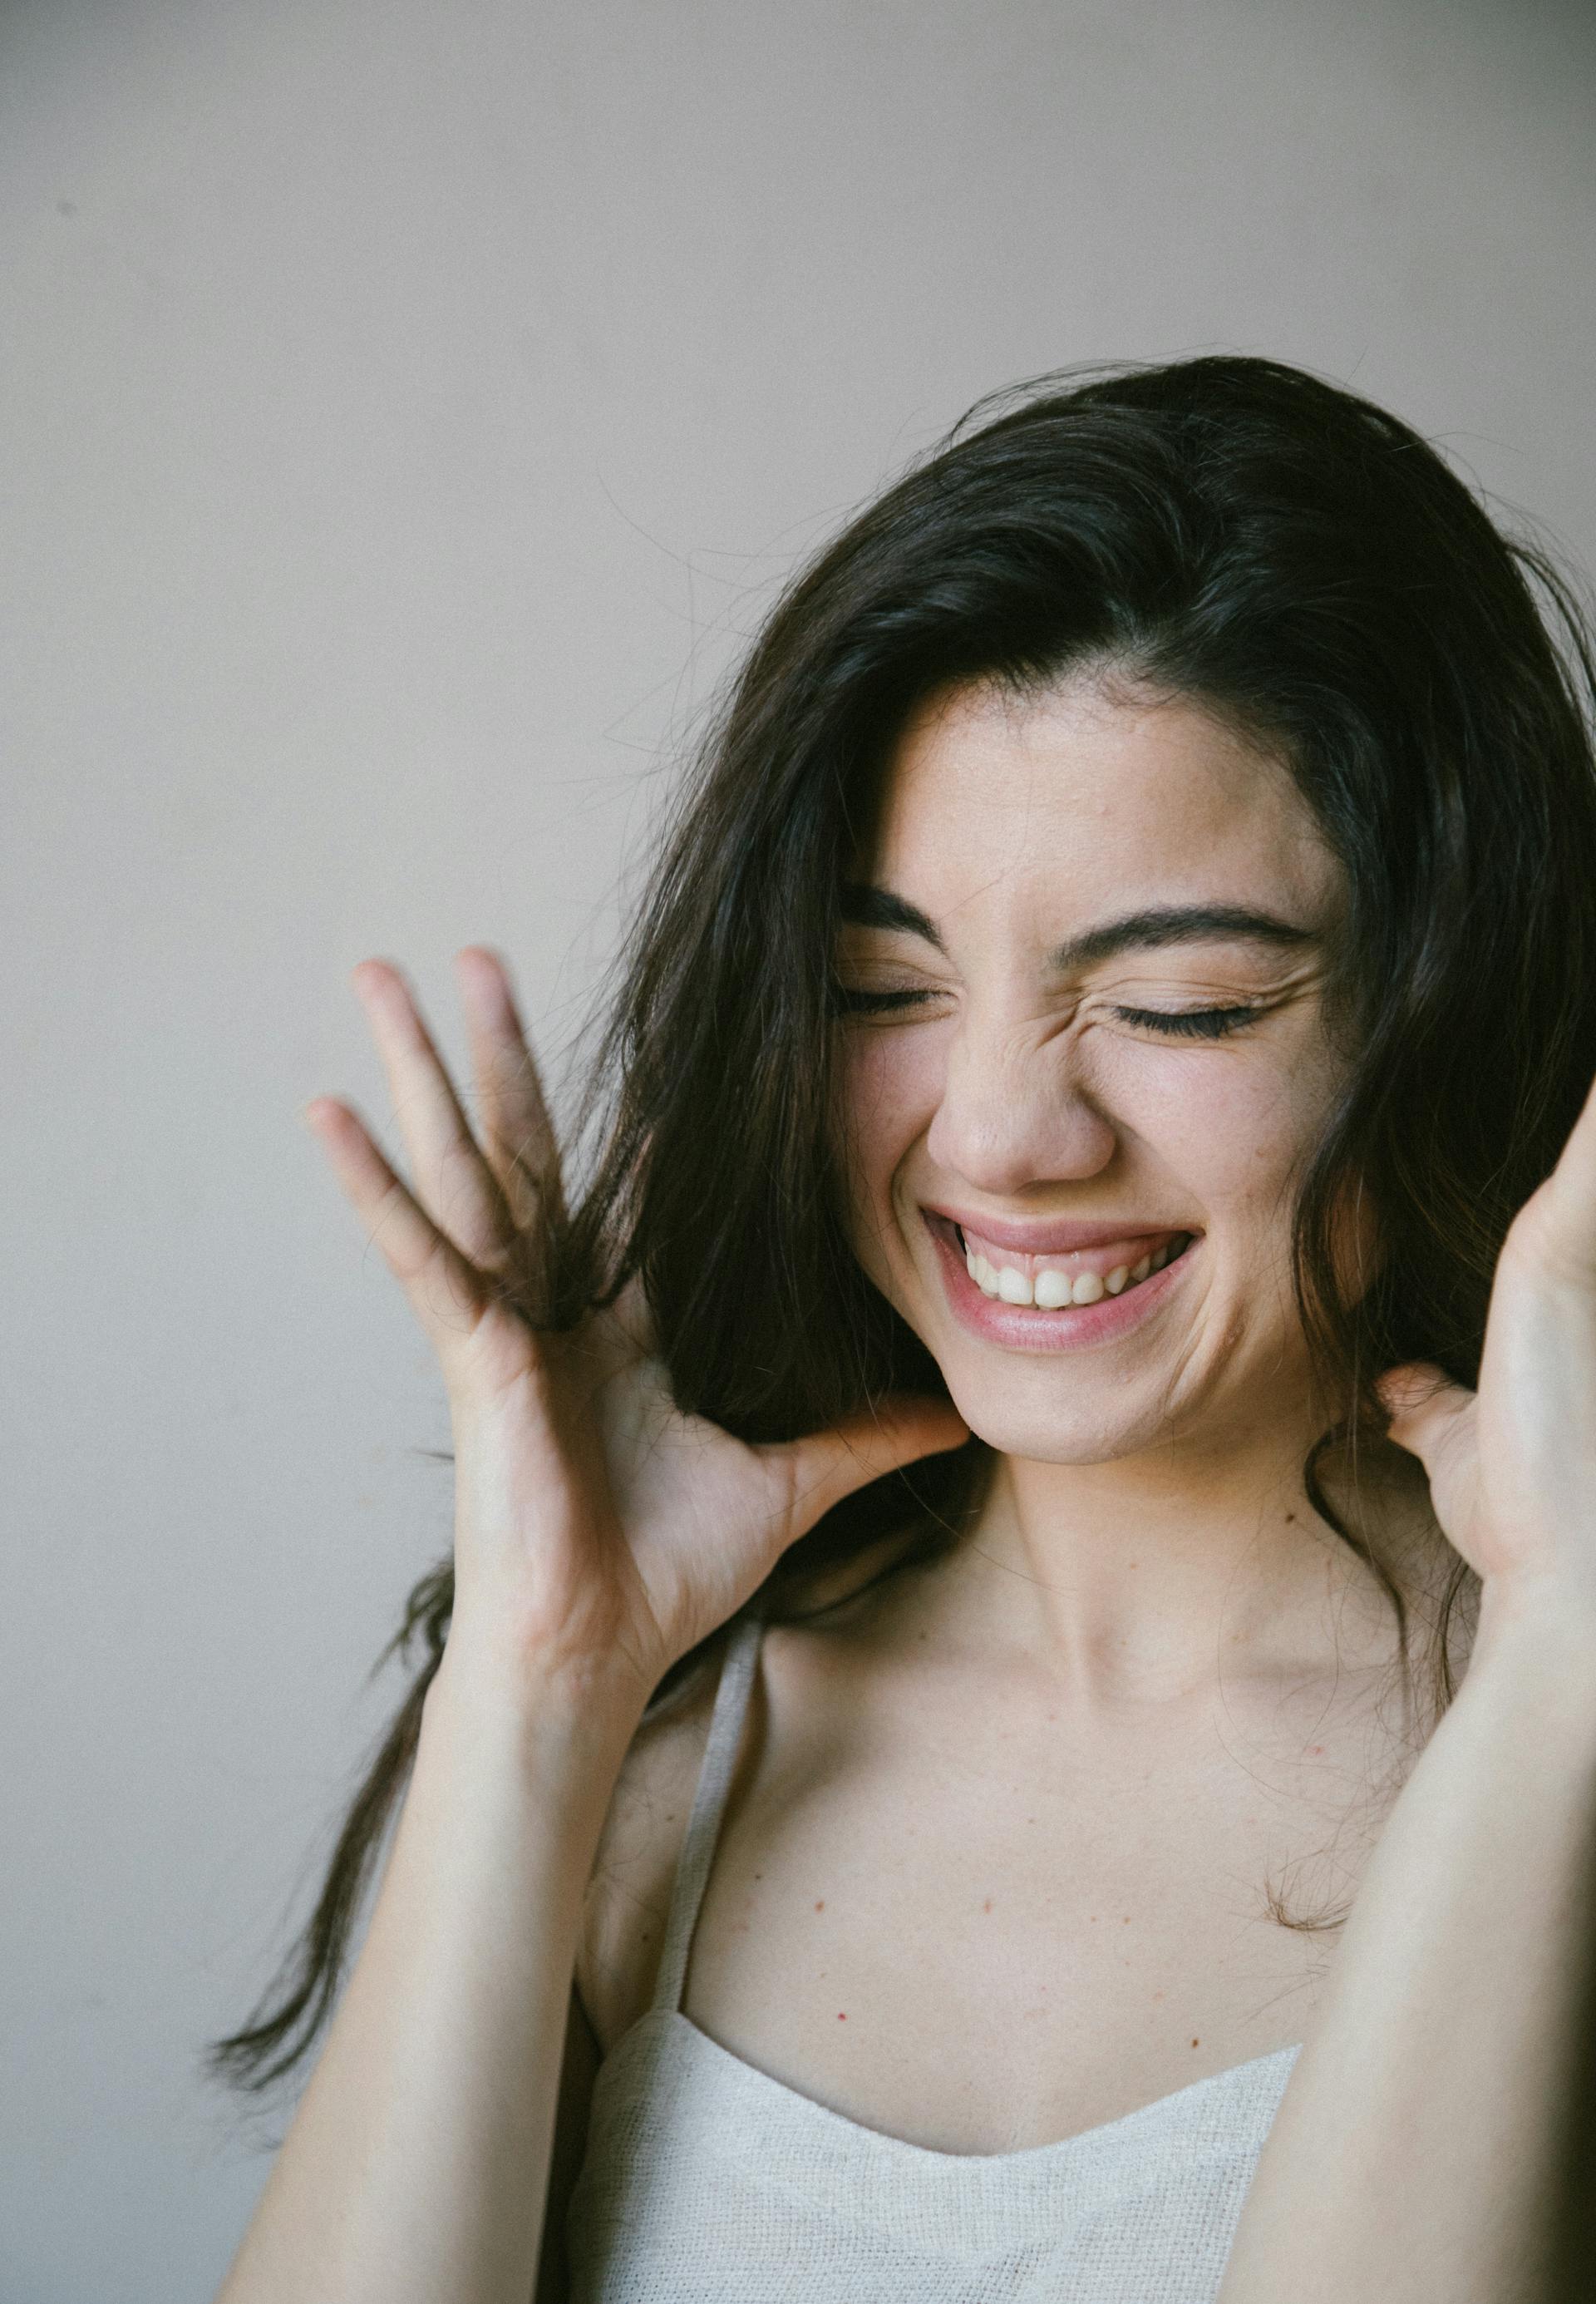 A woman giggling | Source: Pexels